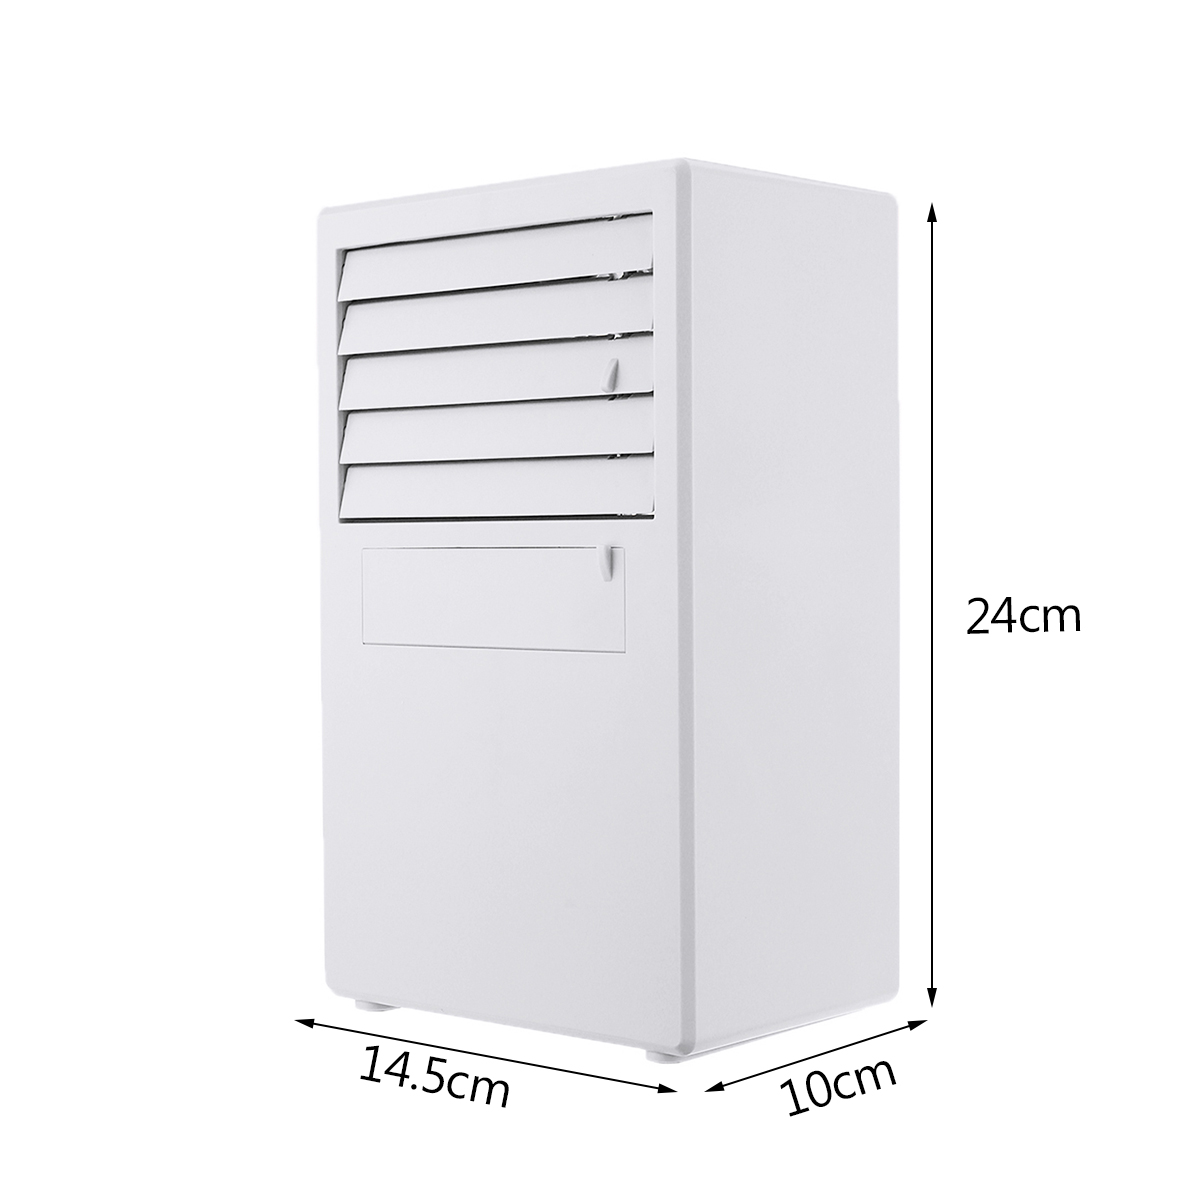 24W-24V-Portable-Air-Conditioning-Fan-Low-Noise-3-Wind-Speeds-Cooler-Digitals-Cooling-System-Timing--1710103-5